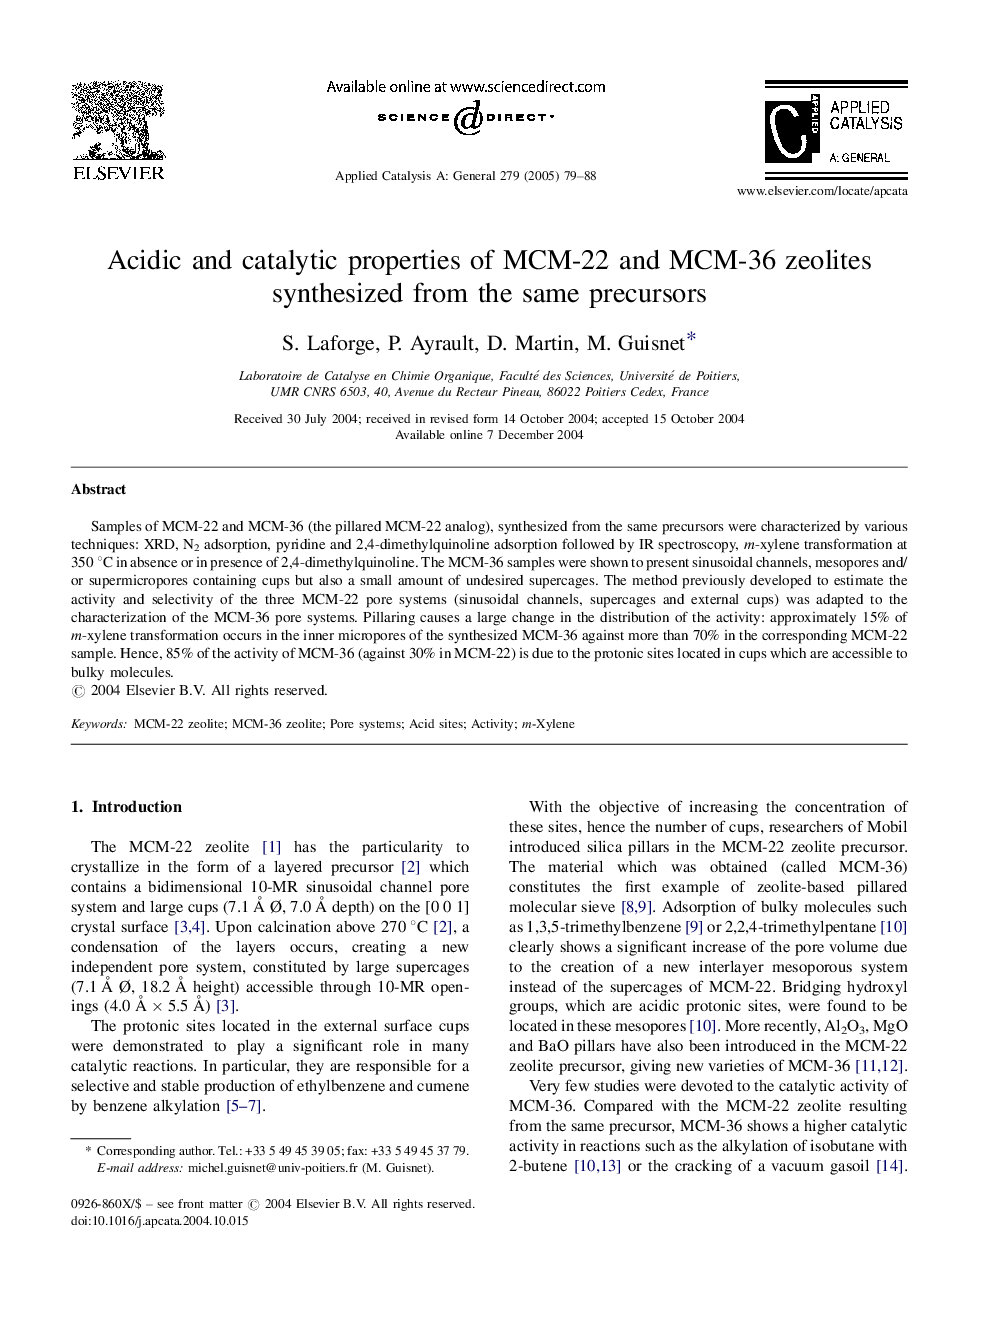 Acidic and catalytic properties of MCM-22 and MCM-36 zeolites synthesized from the same precursors